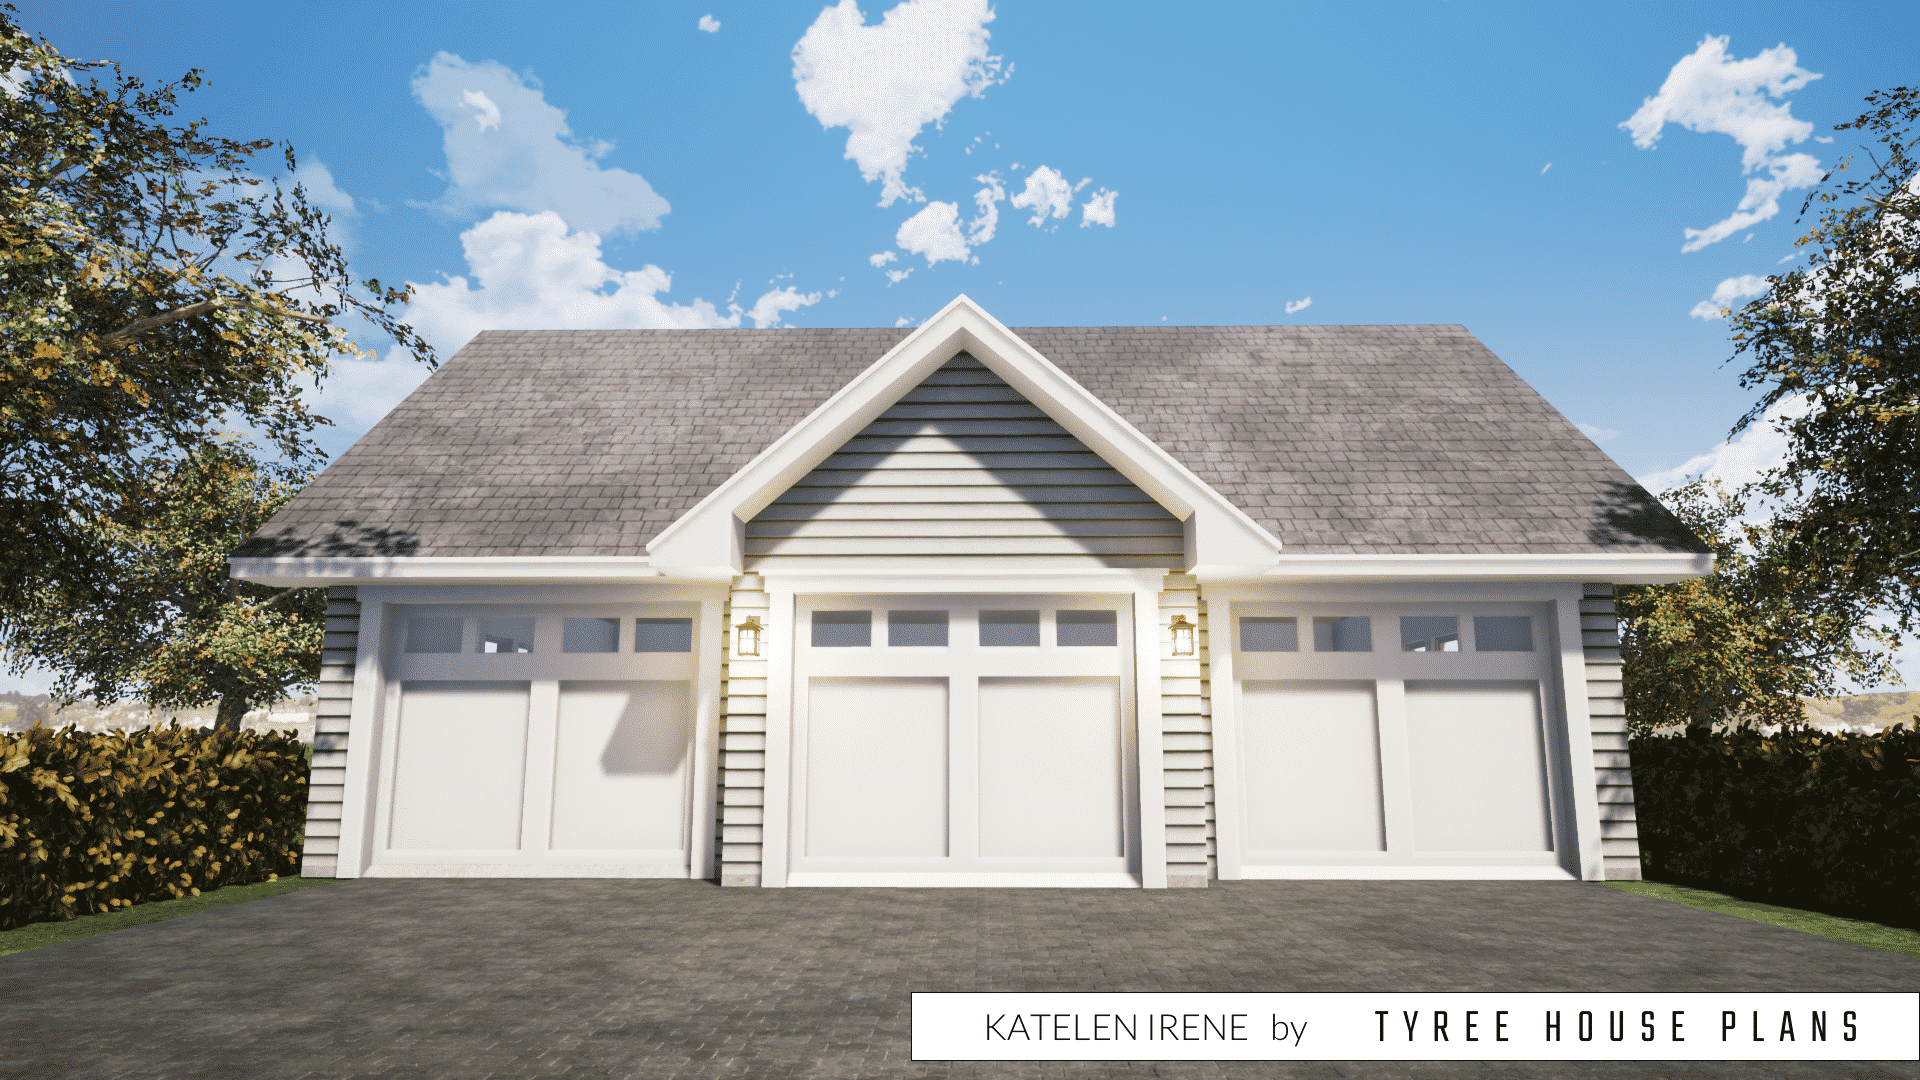 Detached garage. Katelen Irene by Tyree House Plans.